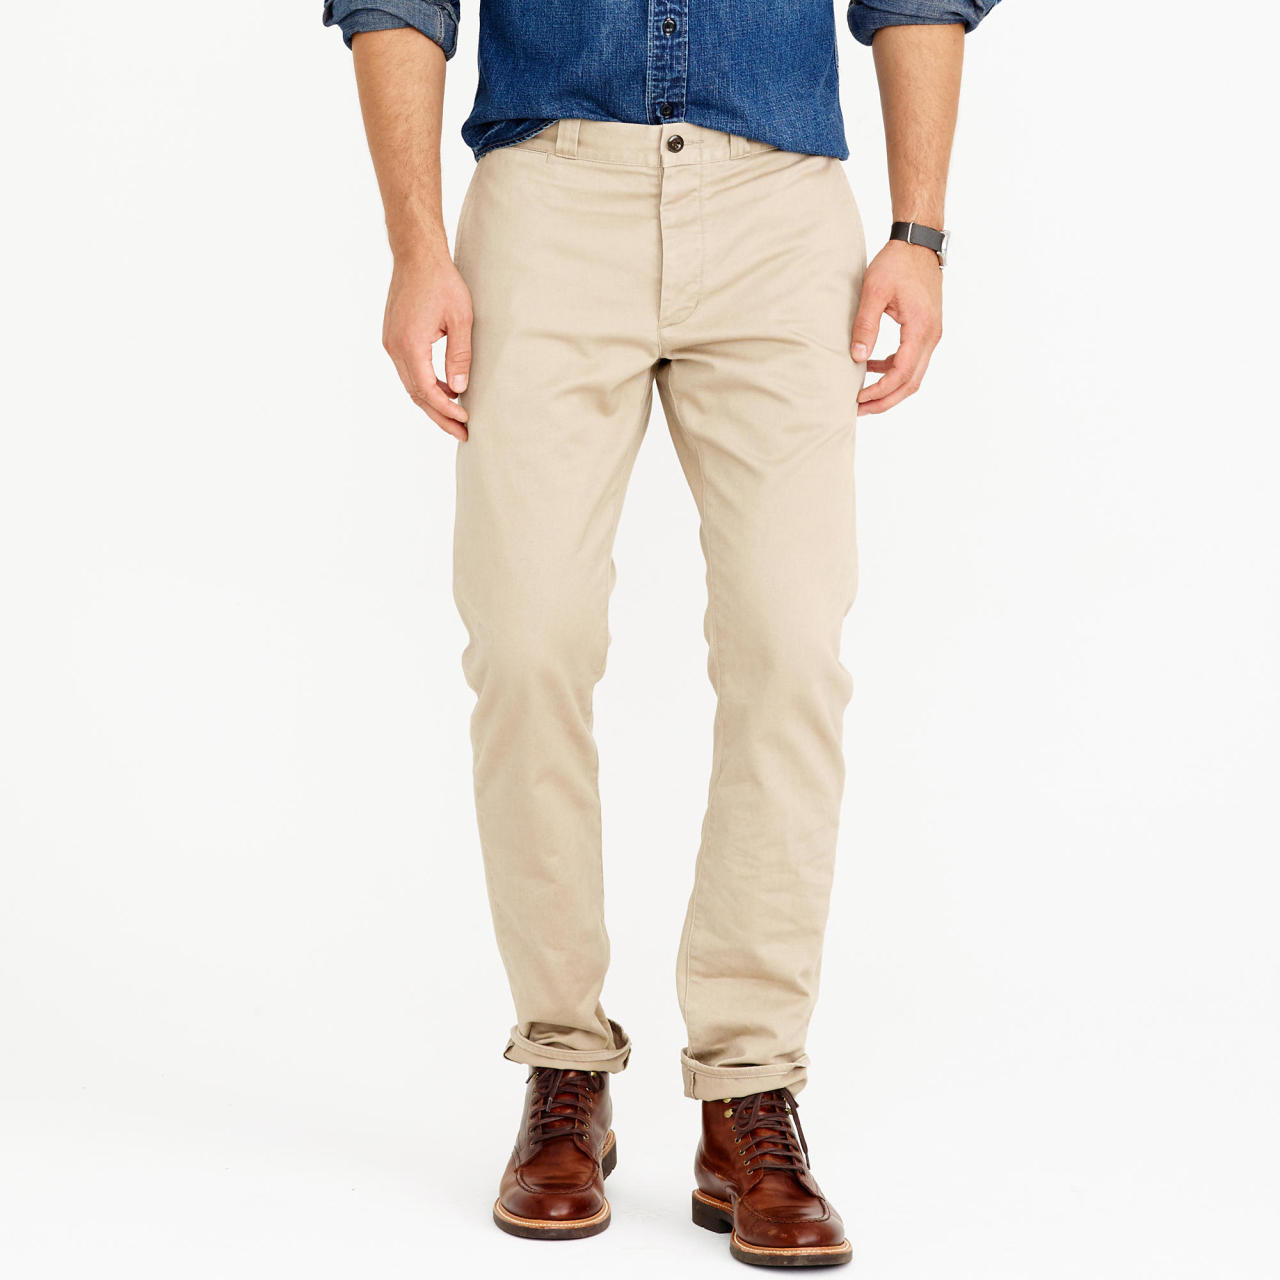 “This is the Pair You Want”: Chinos and Denim by... | This Fits ...